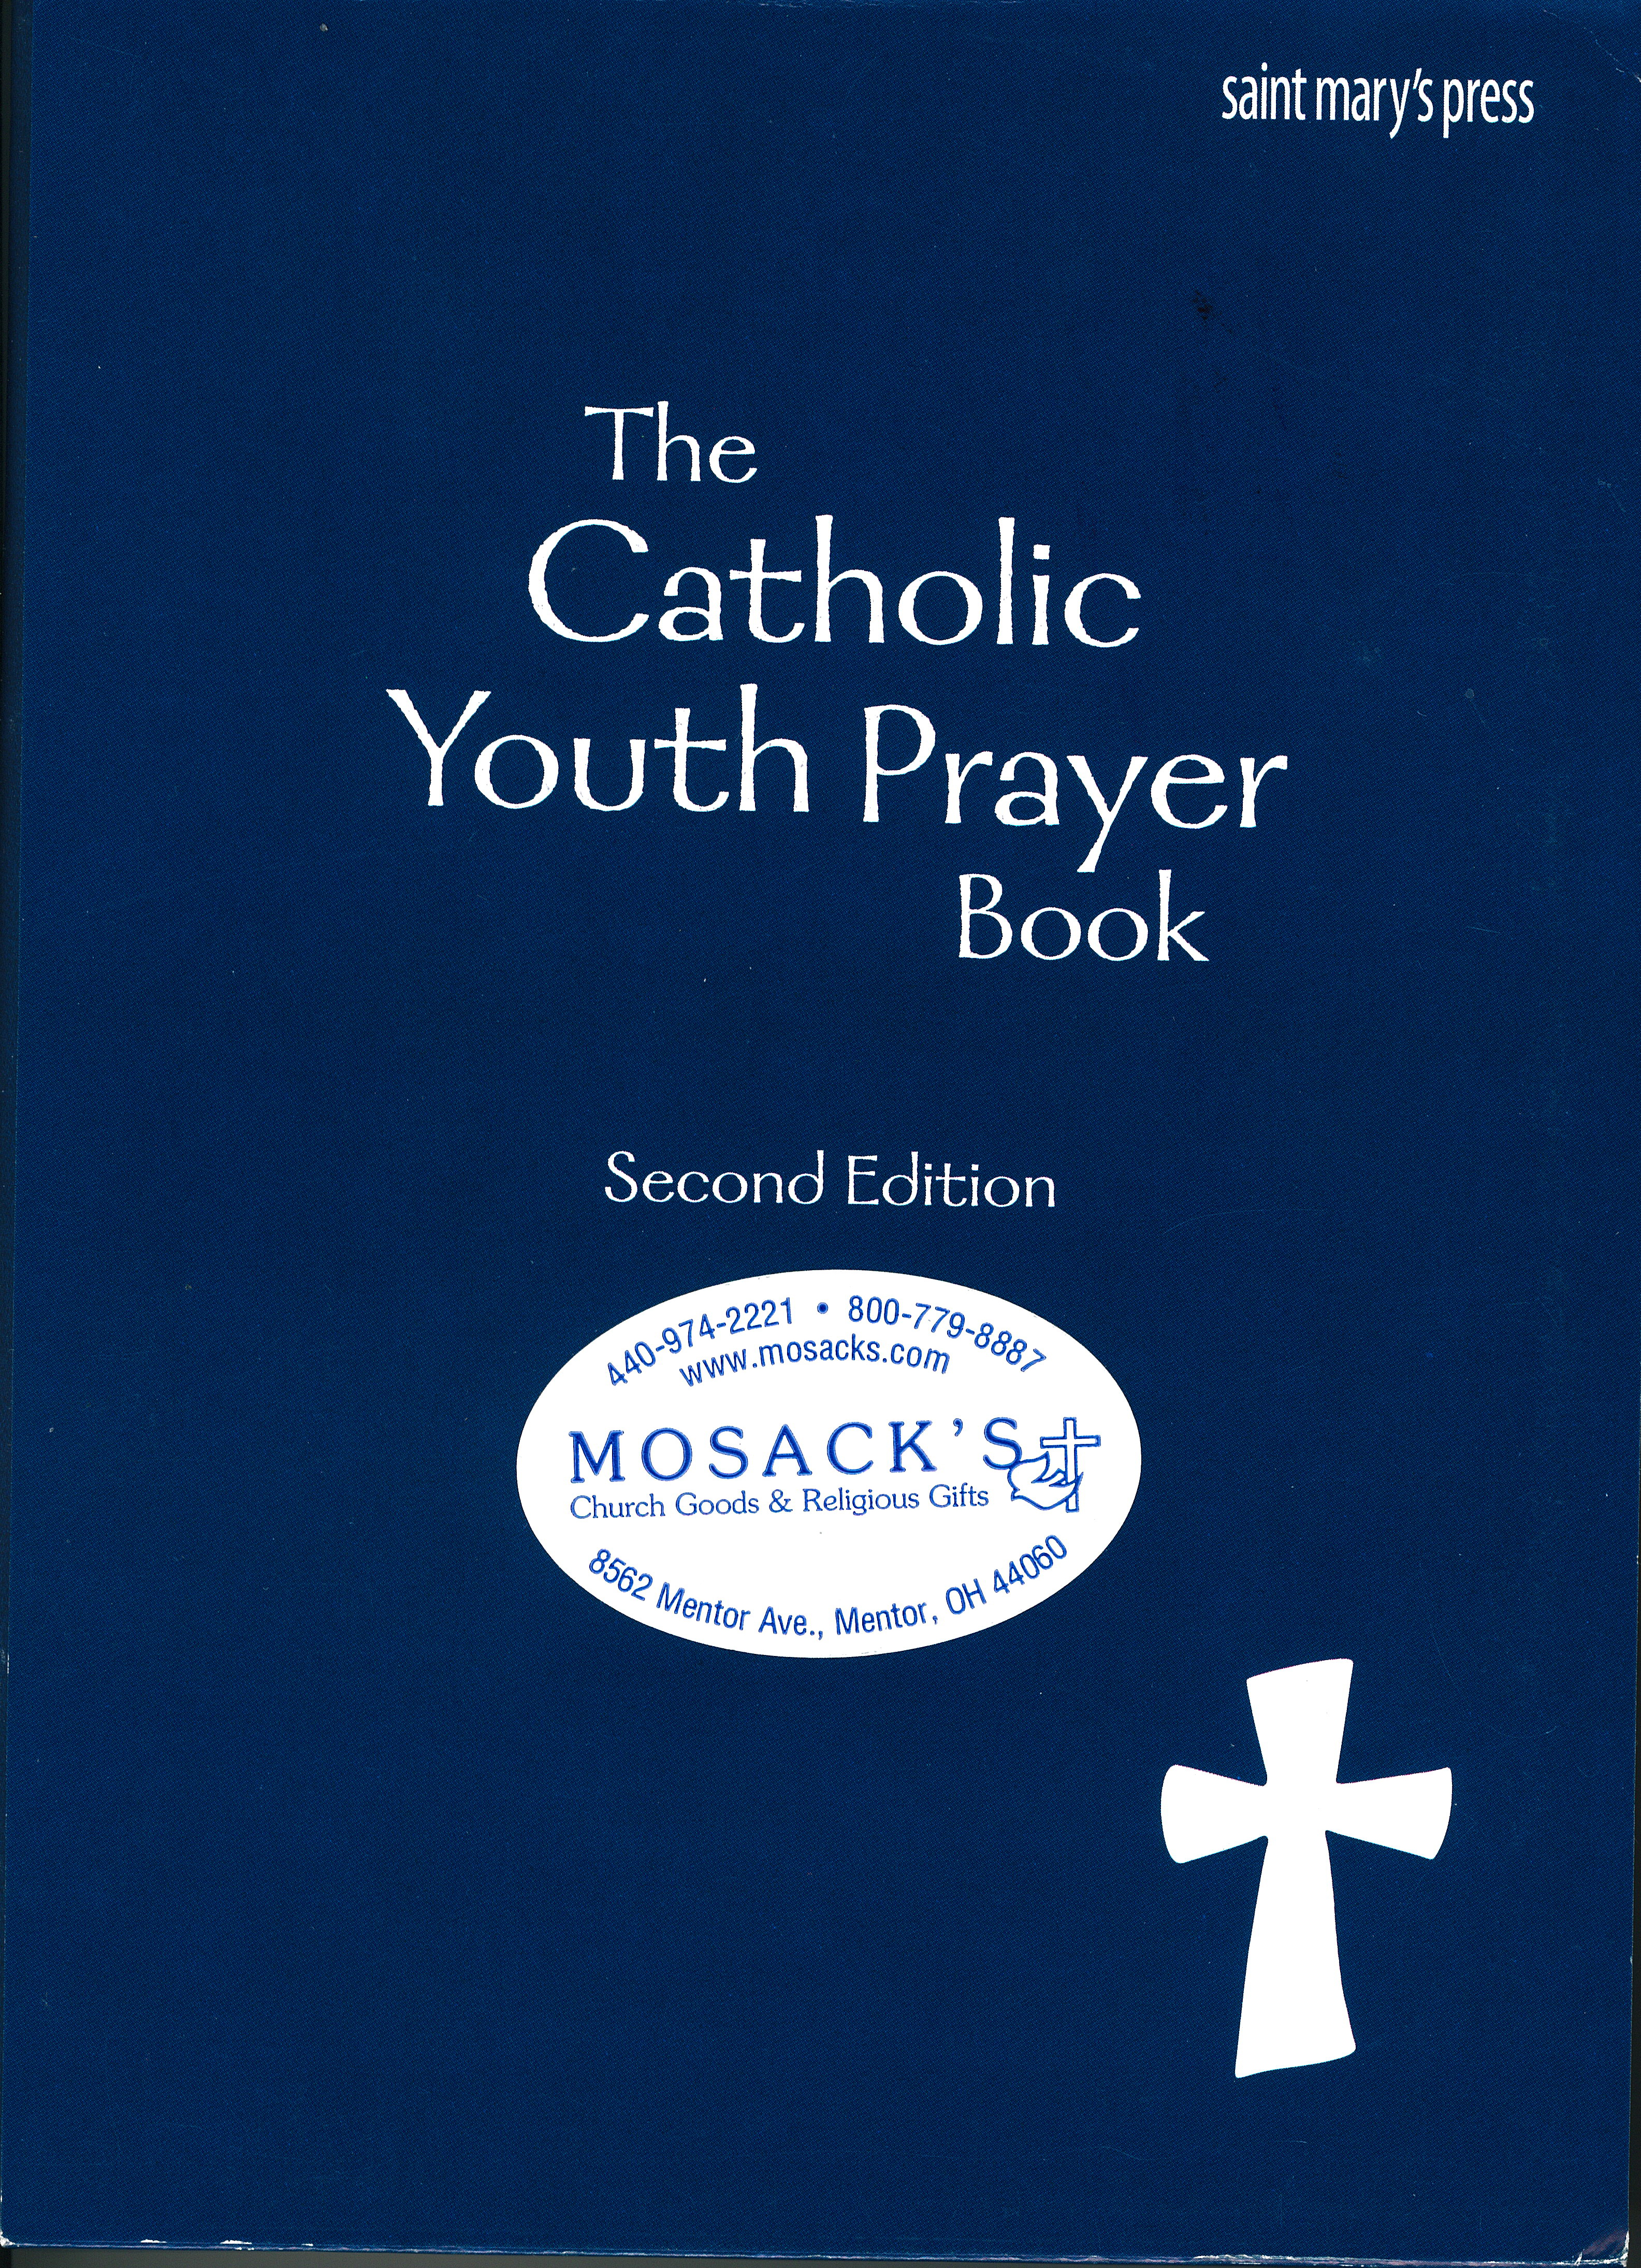 The Catholic Youth Prayer Book, Second Edition, from Saint Mary's Press 69-9781599823331